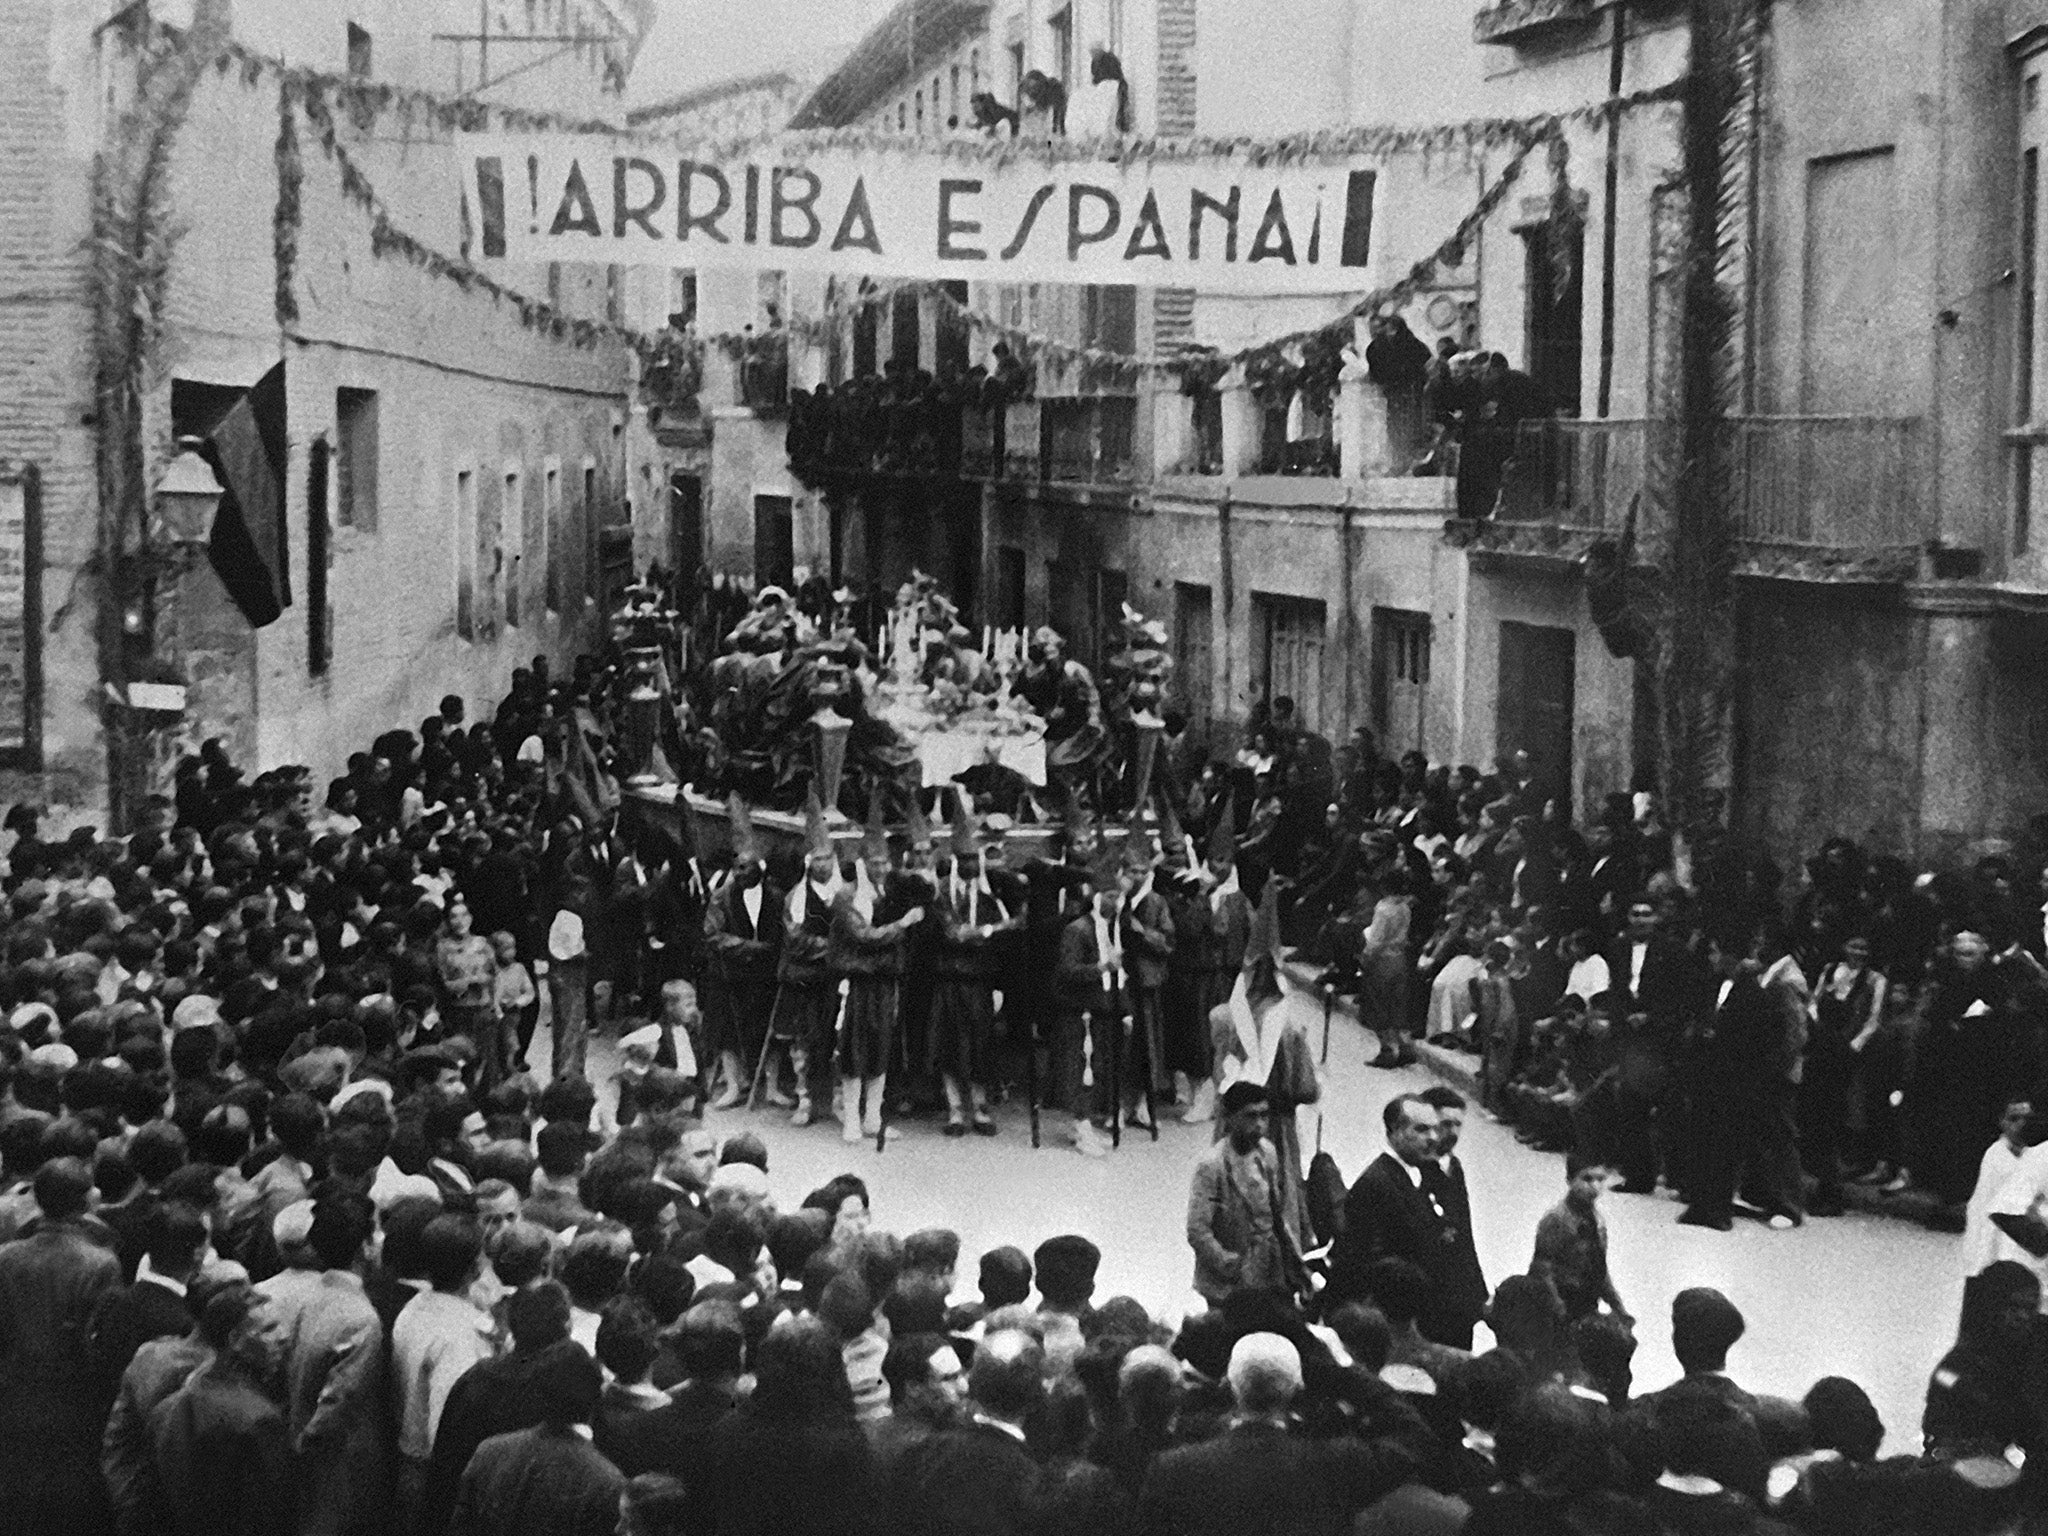 Pro-Franco crowds in Murcia, Spain, celebrate the end of the civil war in 1939